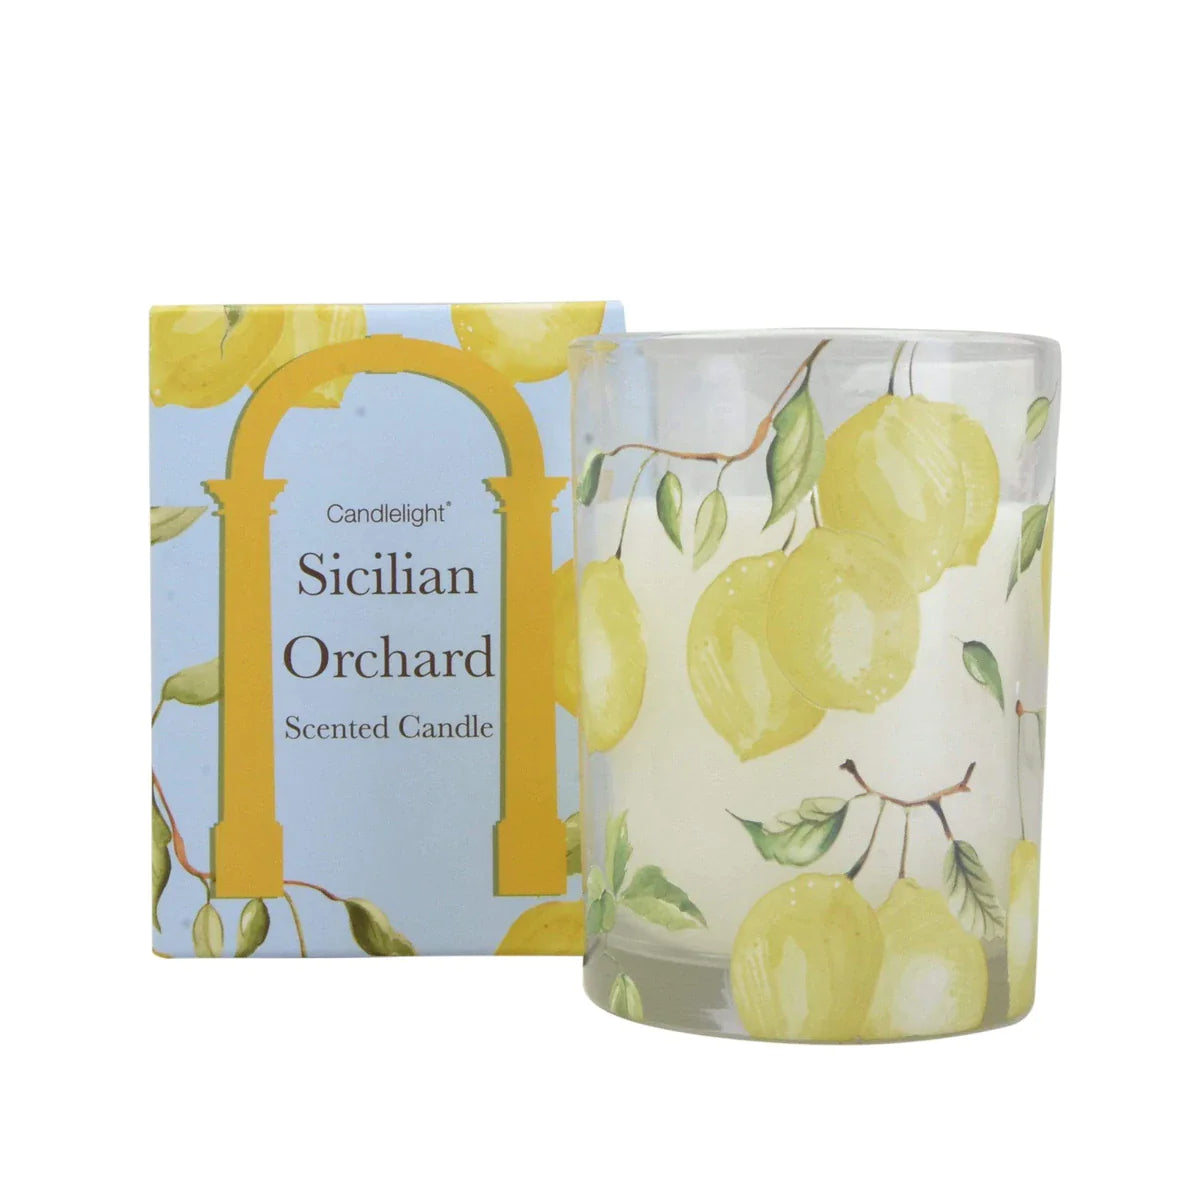 SICILIAN ORCHARD SCENTED CANDLE